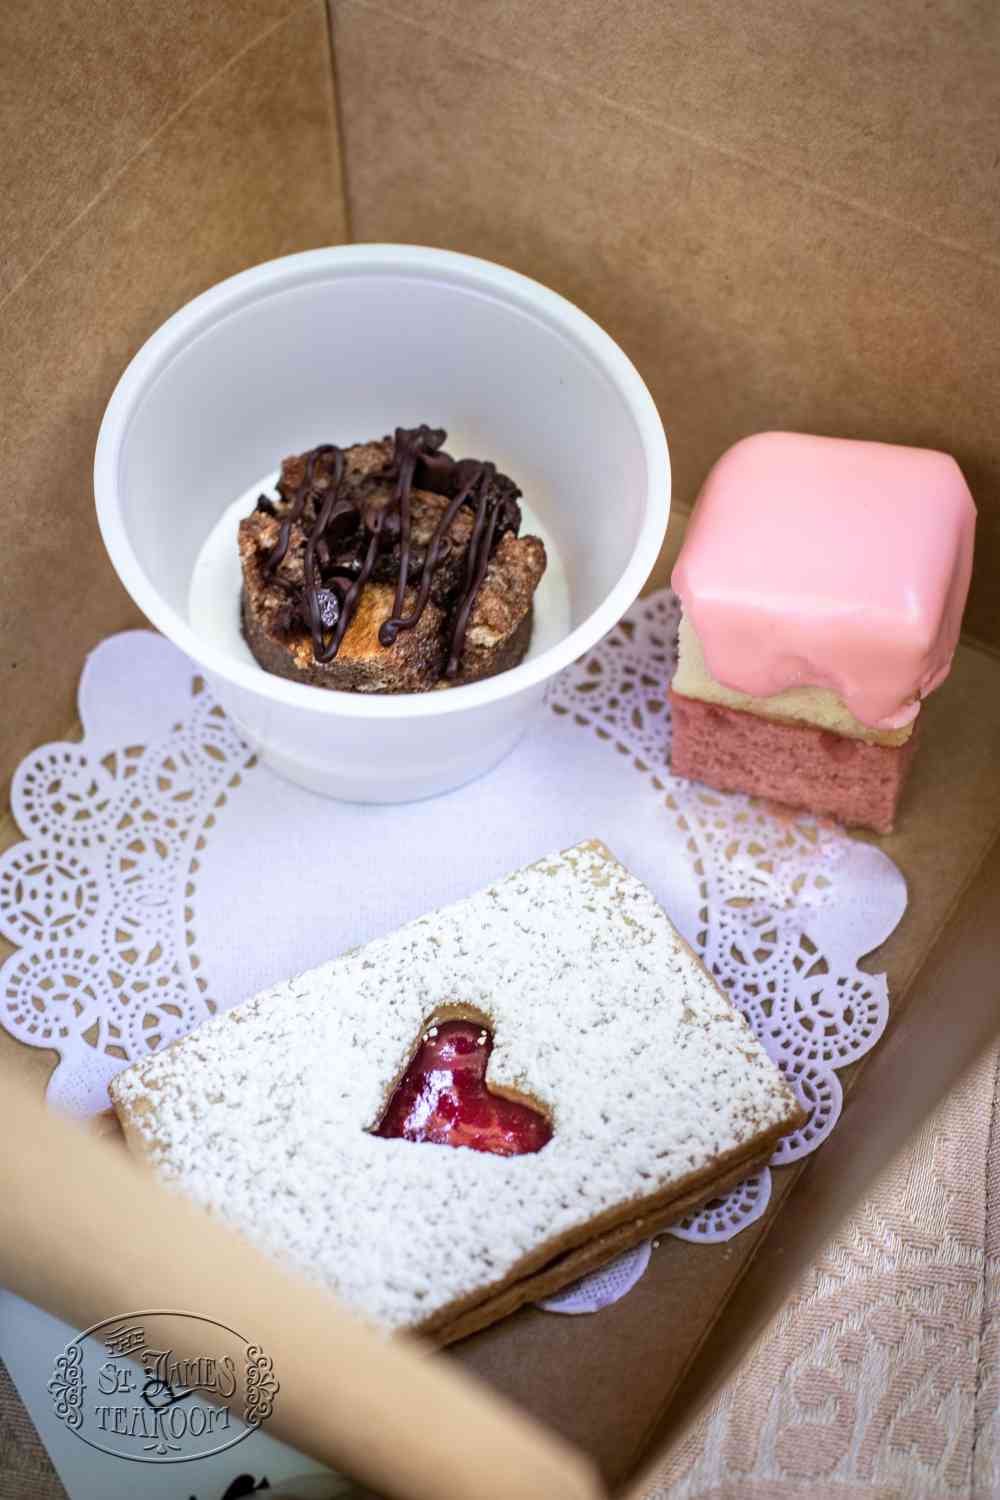 Carry Out Fine Dining Albuquerque - Whimsical Wonderland Menu - Sweets for 1